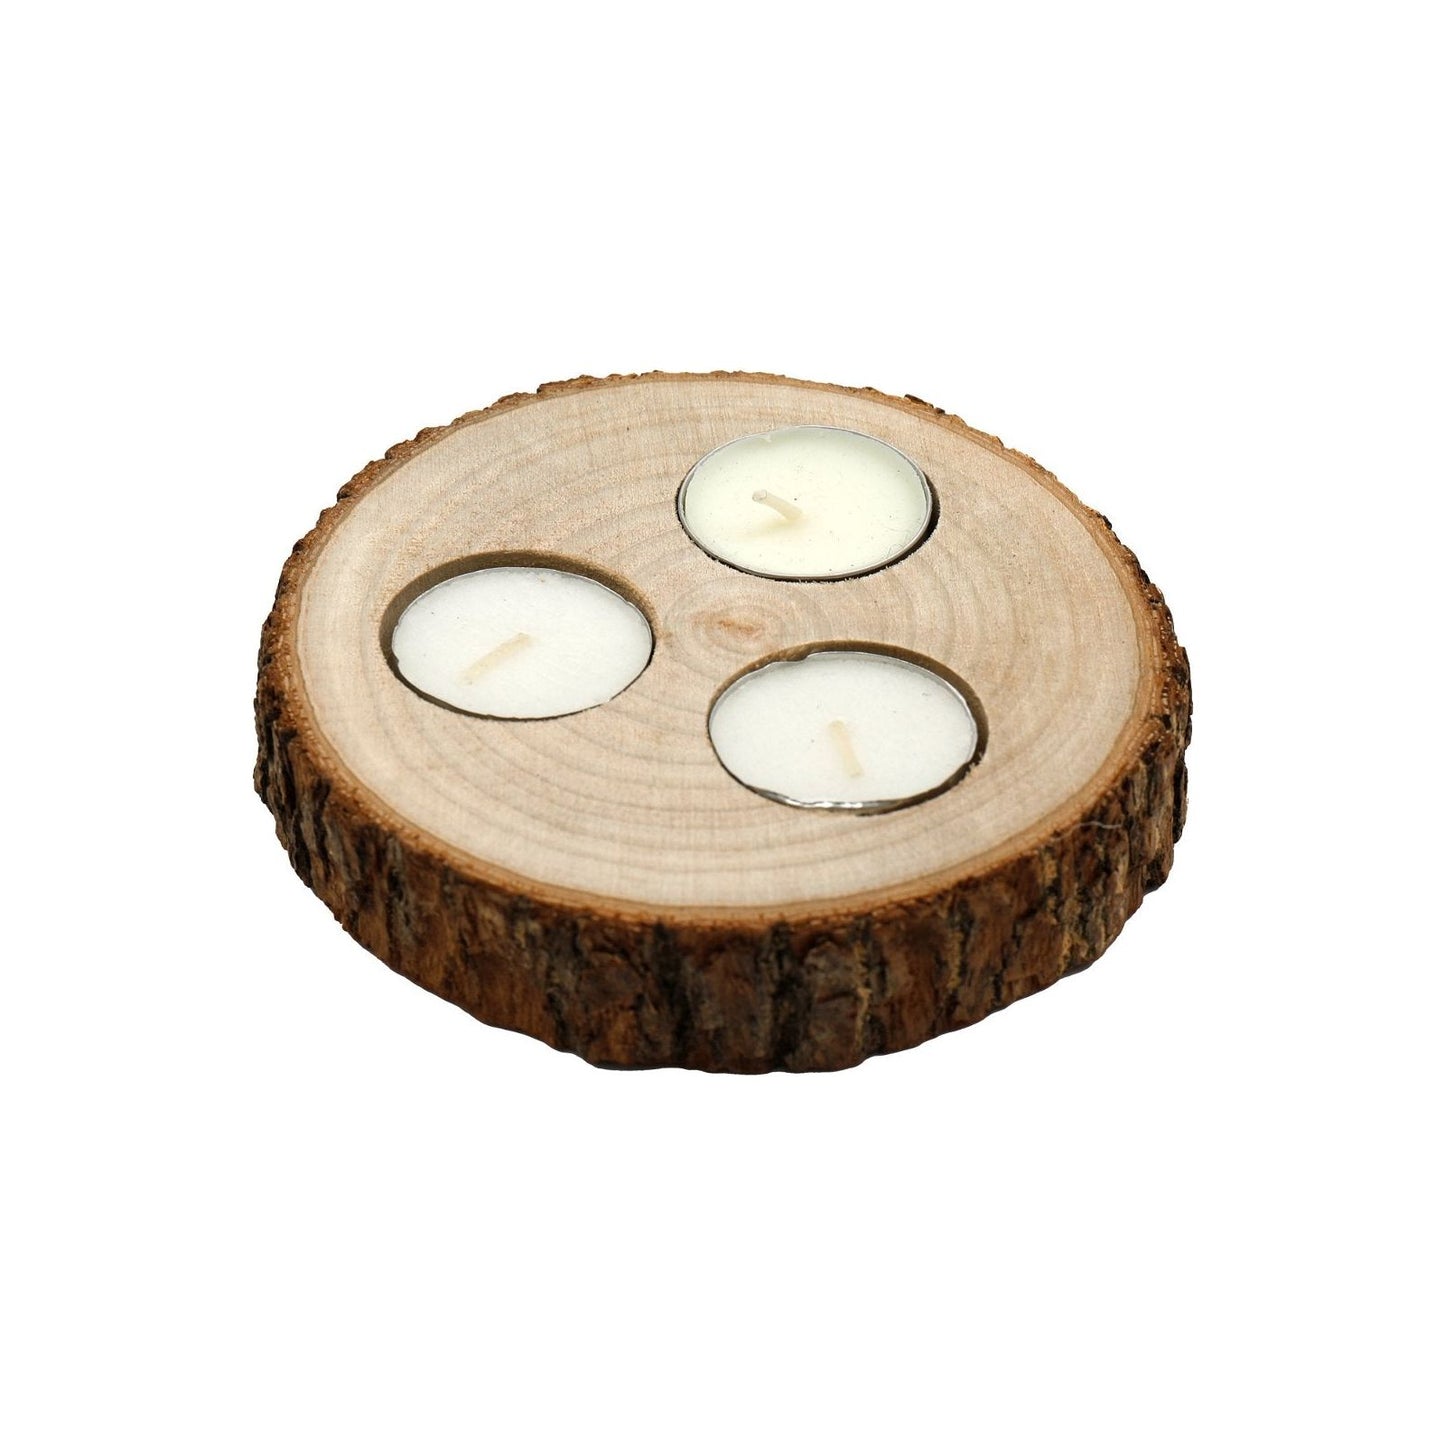 Wooden Triple Tealight Holder with Bark Detail - Ashton and Finch